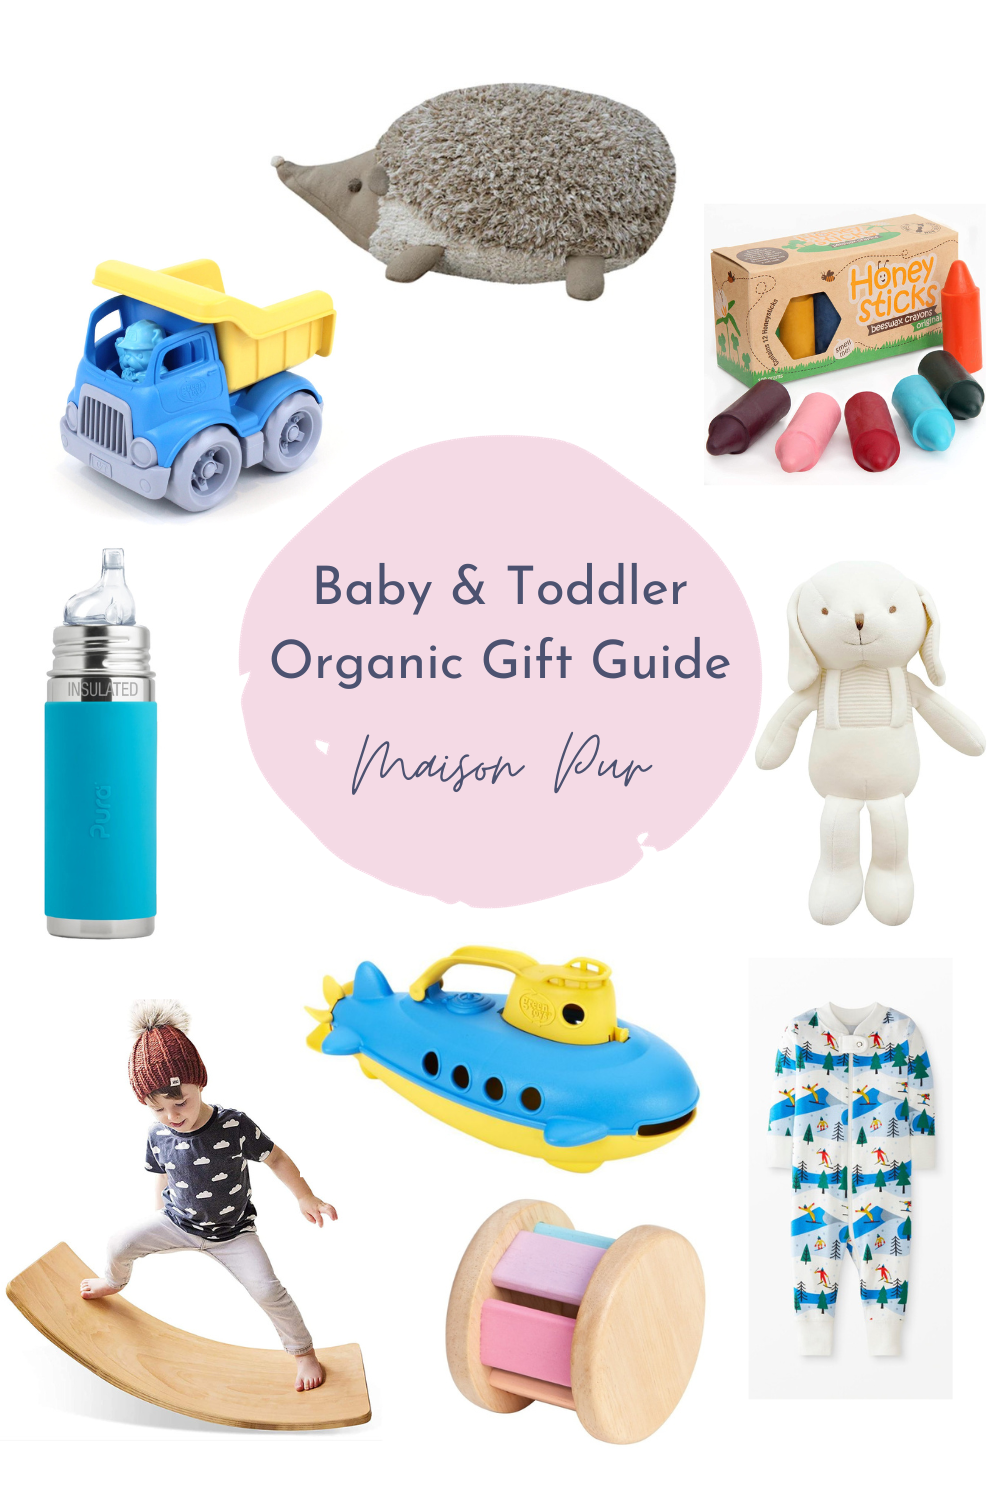 https://maisonpur.com/wp-content/uploads/2021/11/Baby-Toddler-Organic-Gift-Guide-2023-Maison-Pur.png